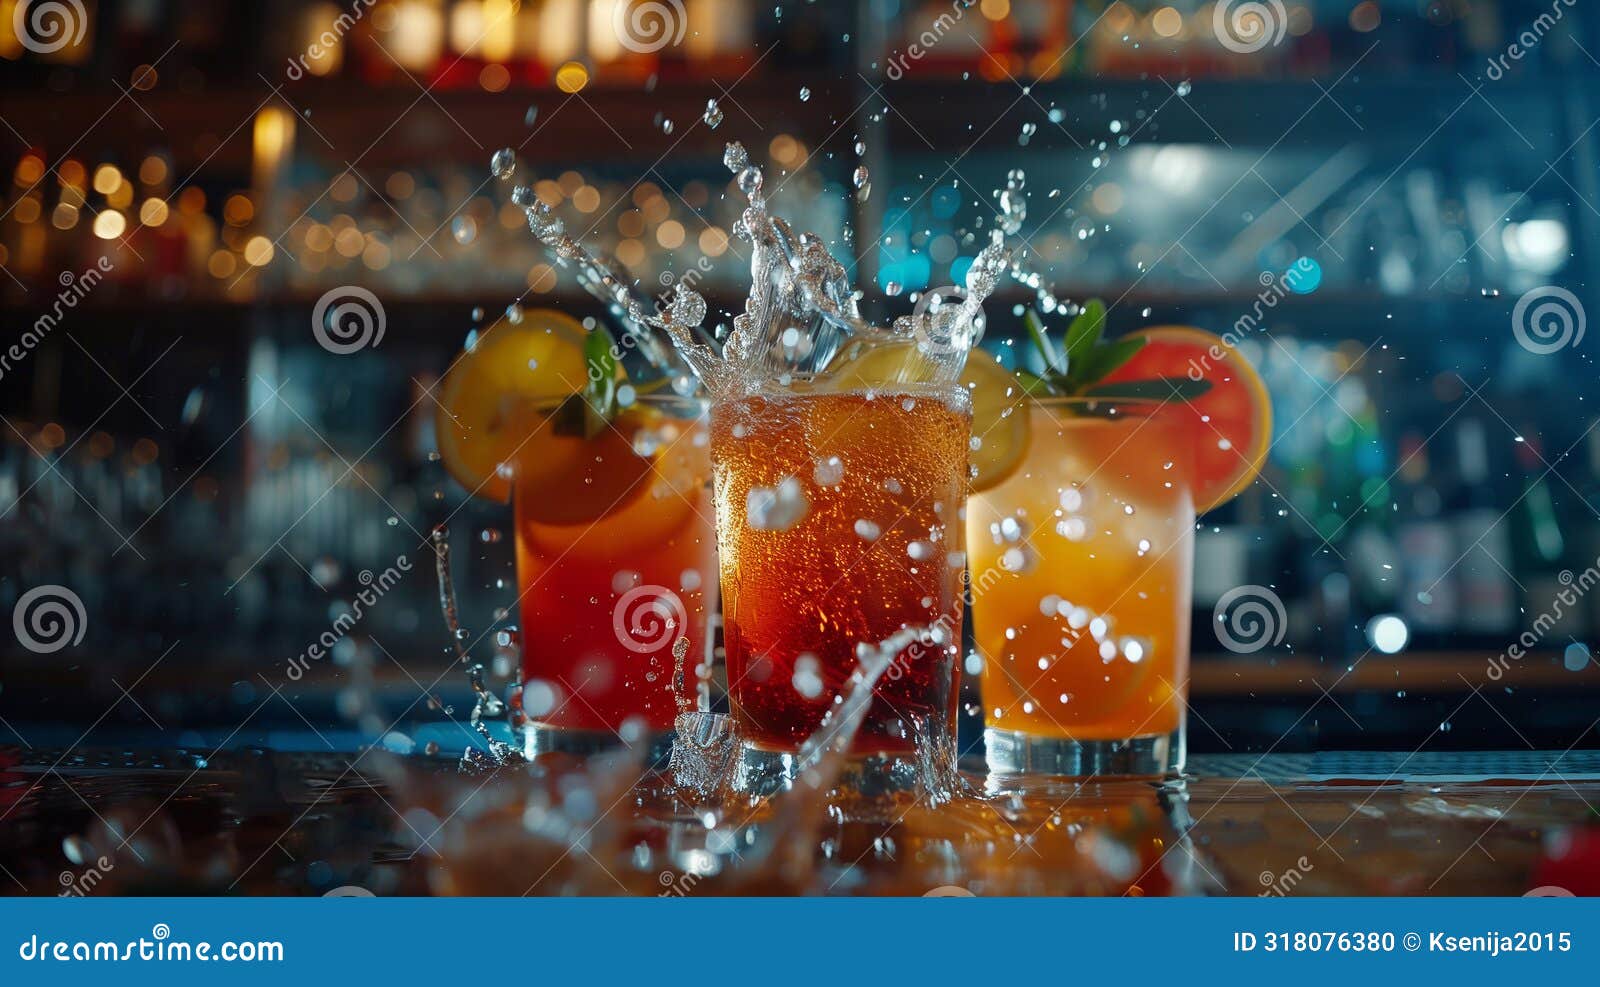 alcoholic drinks. juicy fruit cocktail is poured into a glass with splashes